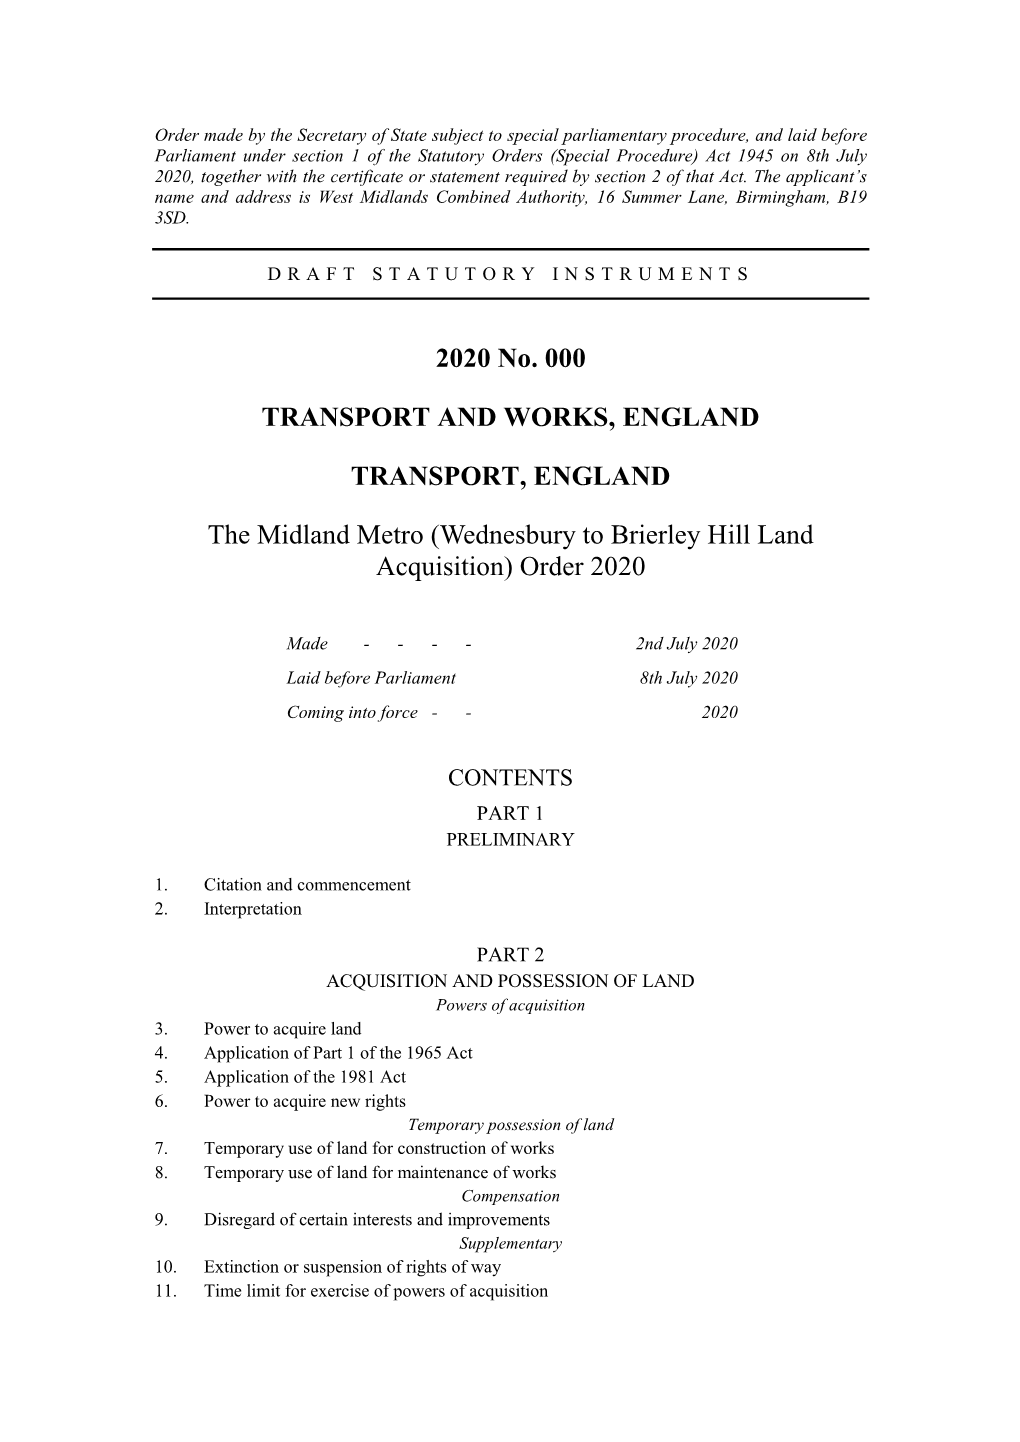 Midland Metro (Wednesbury to Brierley Hill Land Acquisition) Order 2020